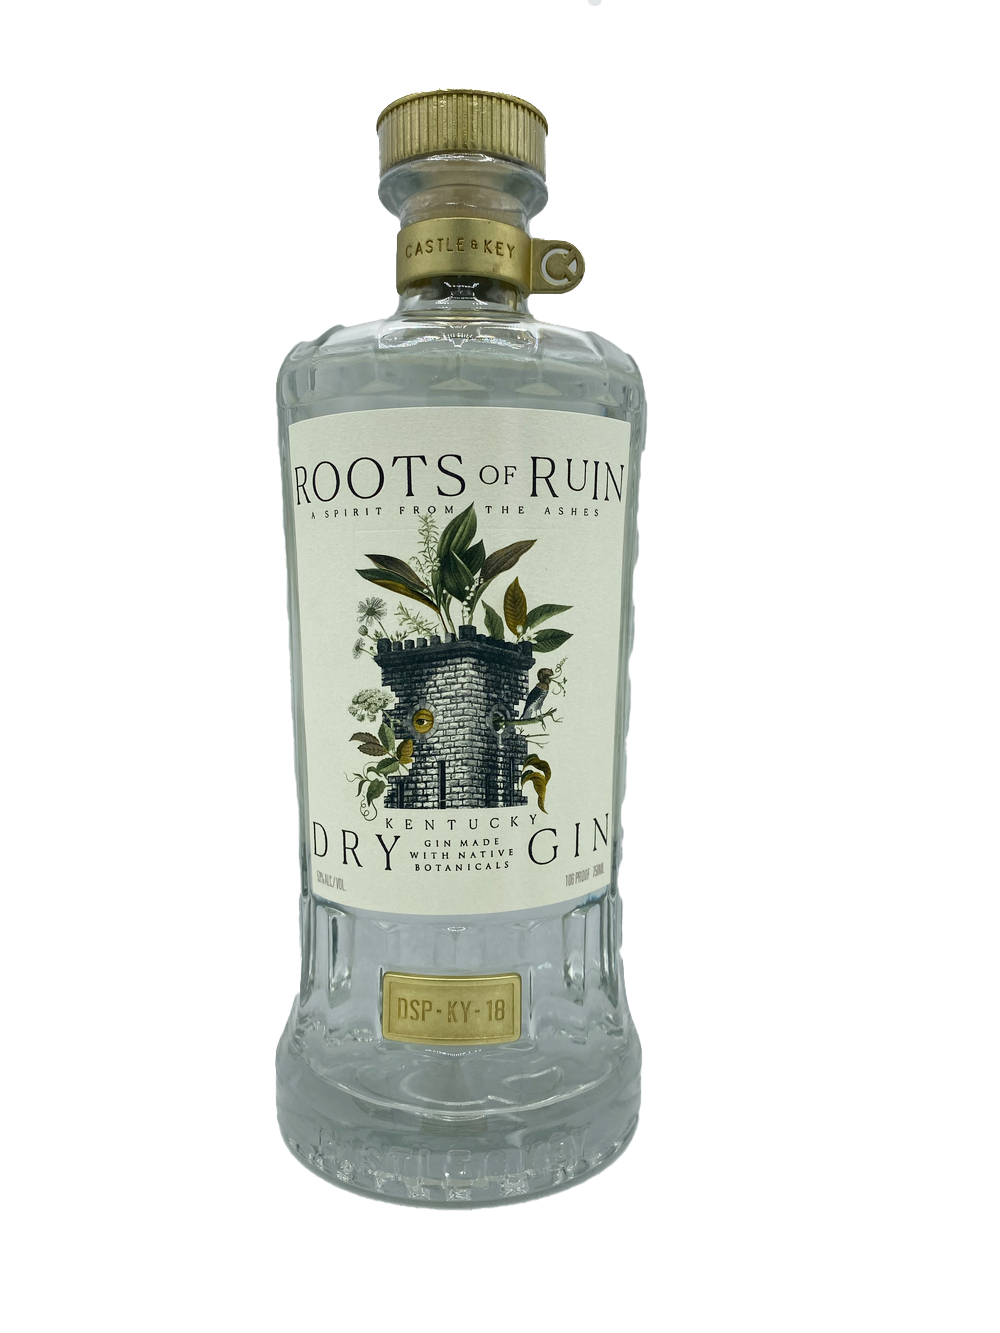 Castle & Key Roots Of Ruin Dry Gin 750ml